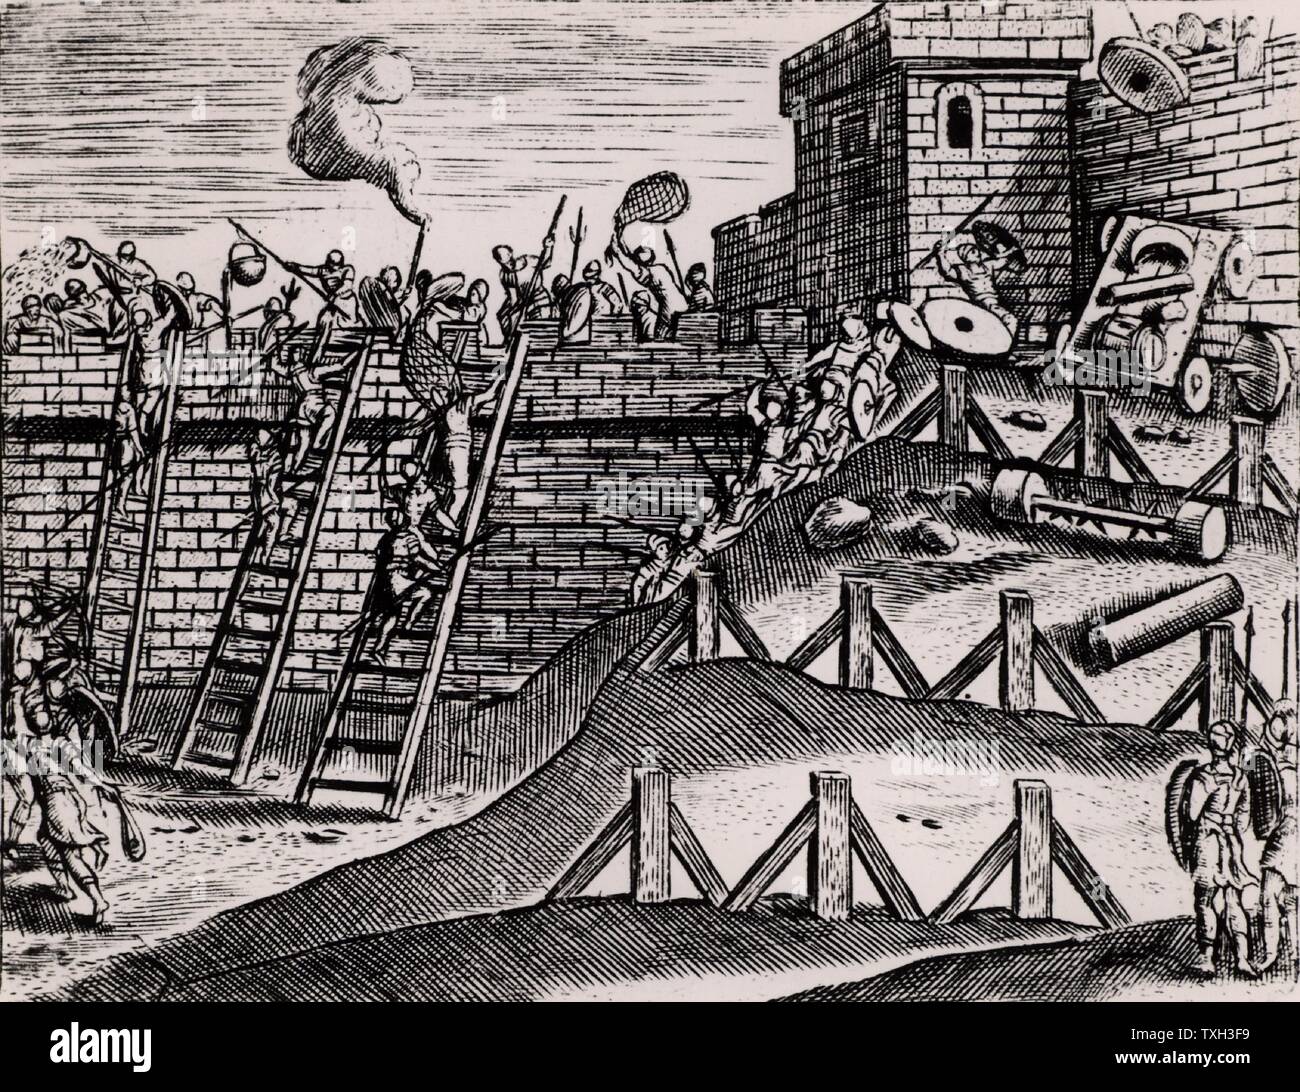 Roman soldiers attacking the walls of a fortress with scaling ladders, slings and spears, while the defenders are holding them off with nets, hot liquid, spears and various missiles.  From "Poliorceticon sive de machinis tormentis telis" by Justus Lipsius (Joost Lips) (Antwerp, 1605). Engraving. Stock Photo